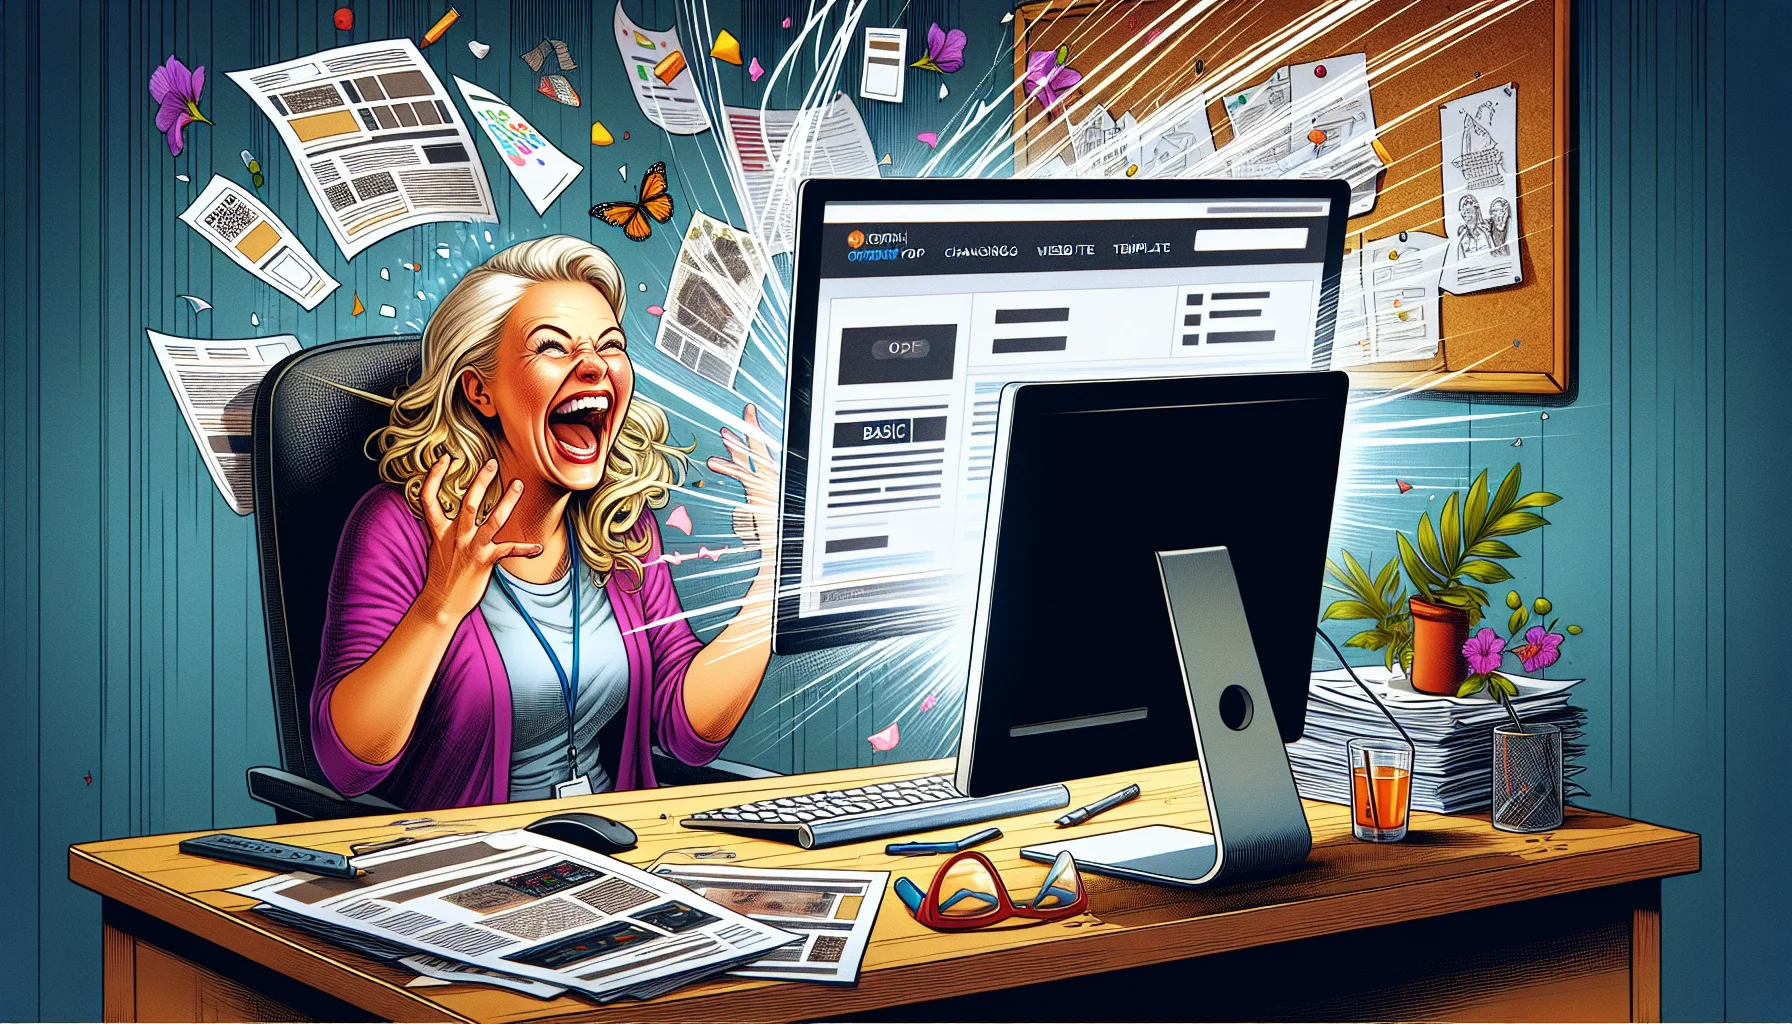 Imagine a humorous scene illustrating the concept of changing website templates in the context of web hosting. Picture a Caucasian woman, laughing joyously as she sits in front of a large computer screen. The screen displays a basic and dull template on one side, and on the other, a vibrant, attractive, and modern template suddenly popping out. The woman is in the process of dragging and dropping this latter template onto her existing website. Surrounding her desk, printouts of code and design ideas are strewn about, symbolizing her attempts to design a good site. This scene should realistically capture the excitement and joy that comes from successfully changing a website template and the comic relief it offers in a potentially stressful web hosting scenario.